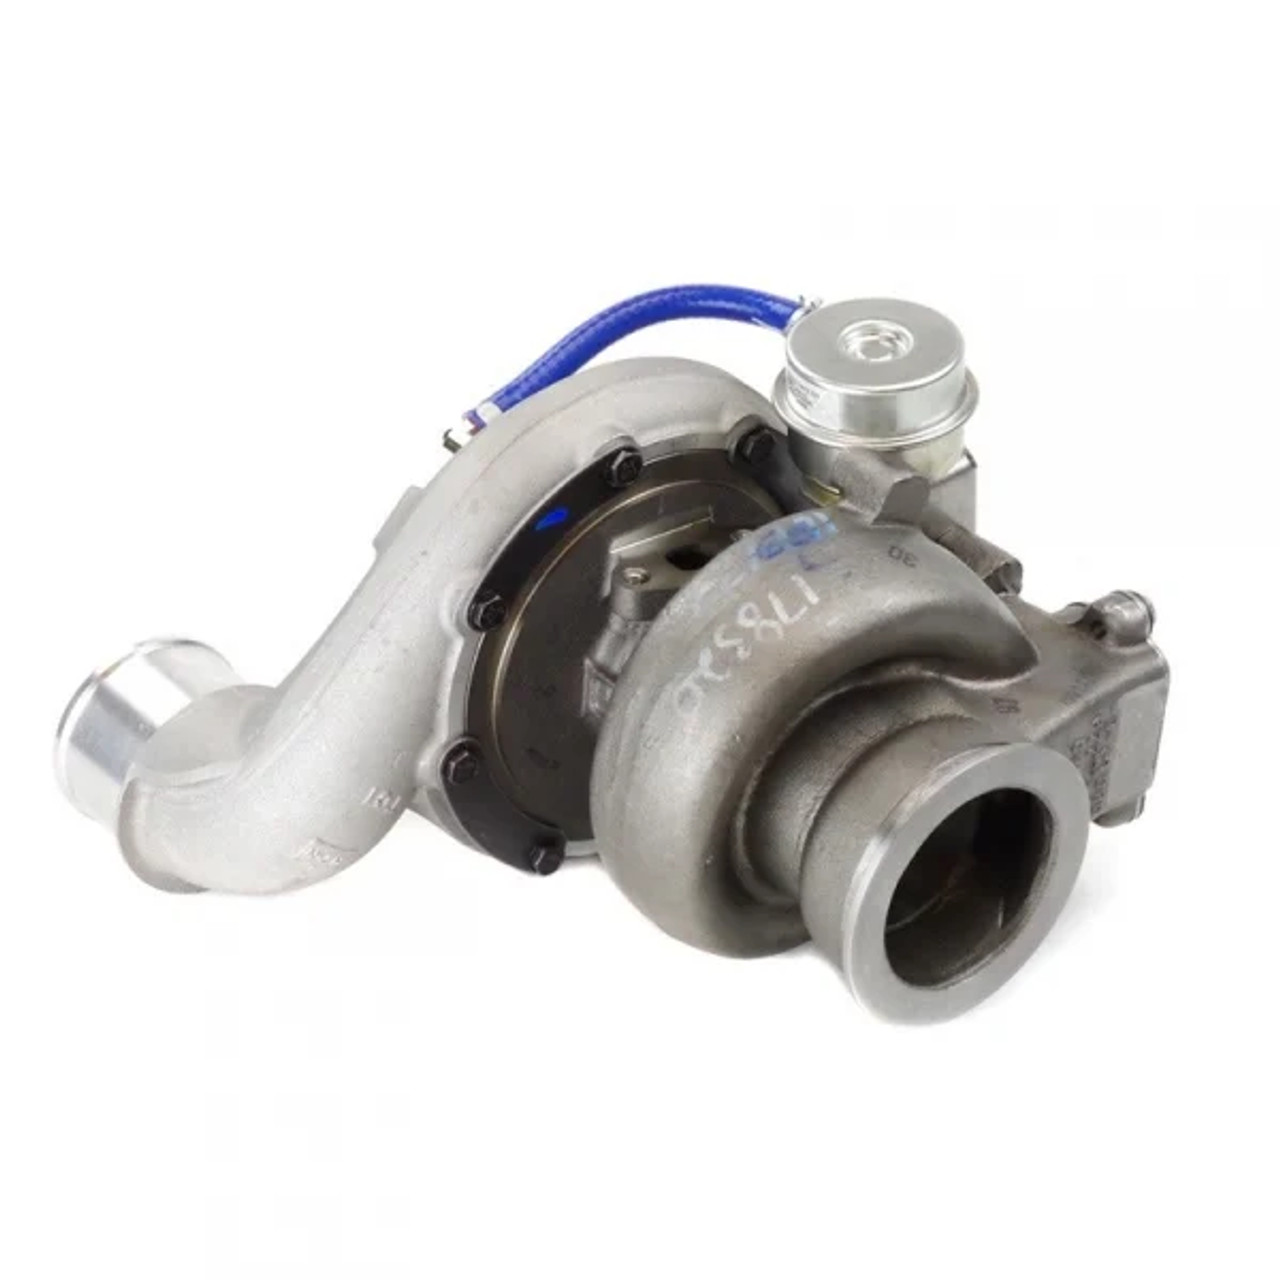 INDUSTRIAL INJECTION SUPER PHATSHAFT 64 TURBO 2003-2004 DODGE 5.9L CUMMINS (WITH FUEL MODIFICATIONS) (II364240711A)Blade Turbo View